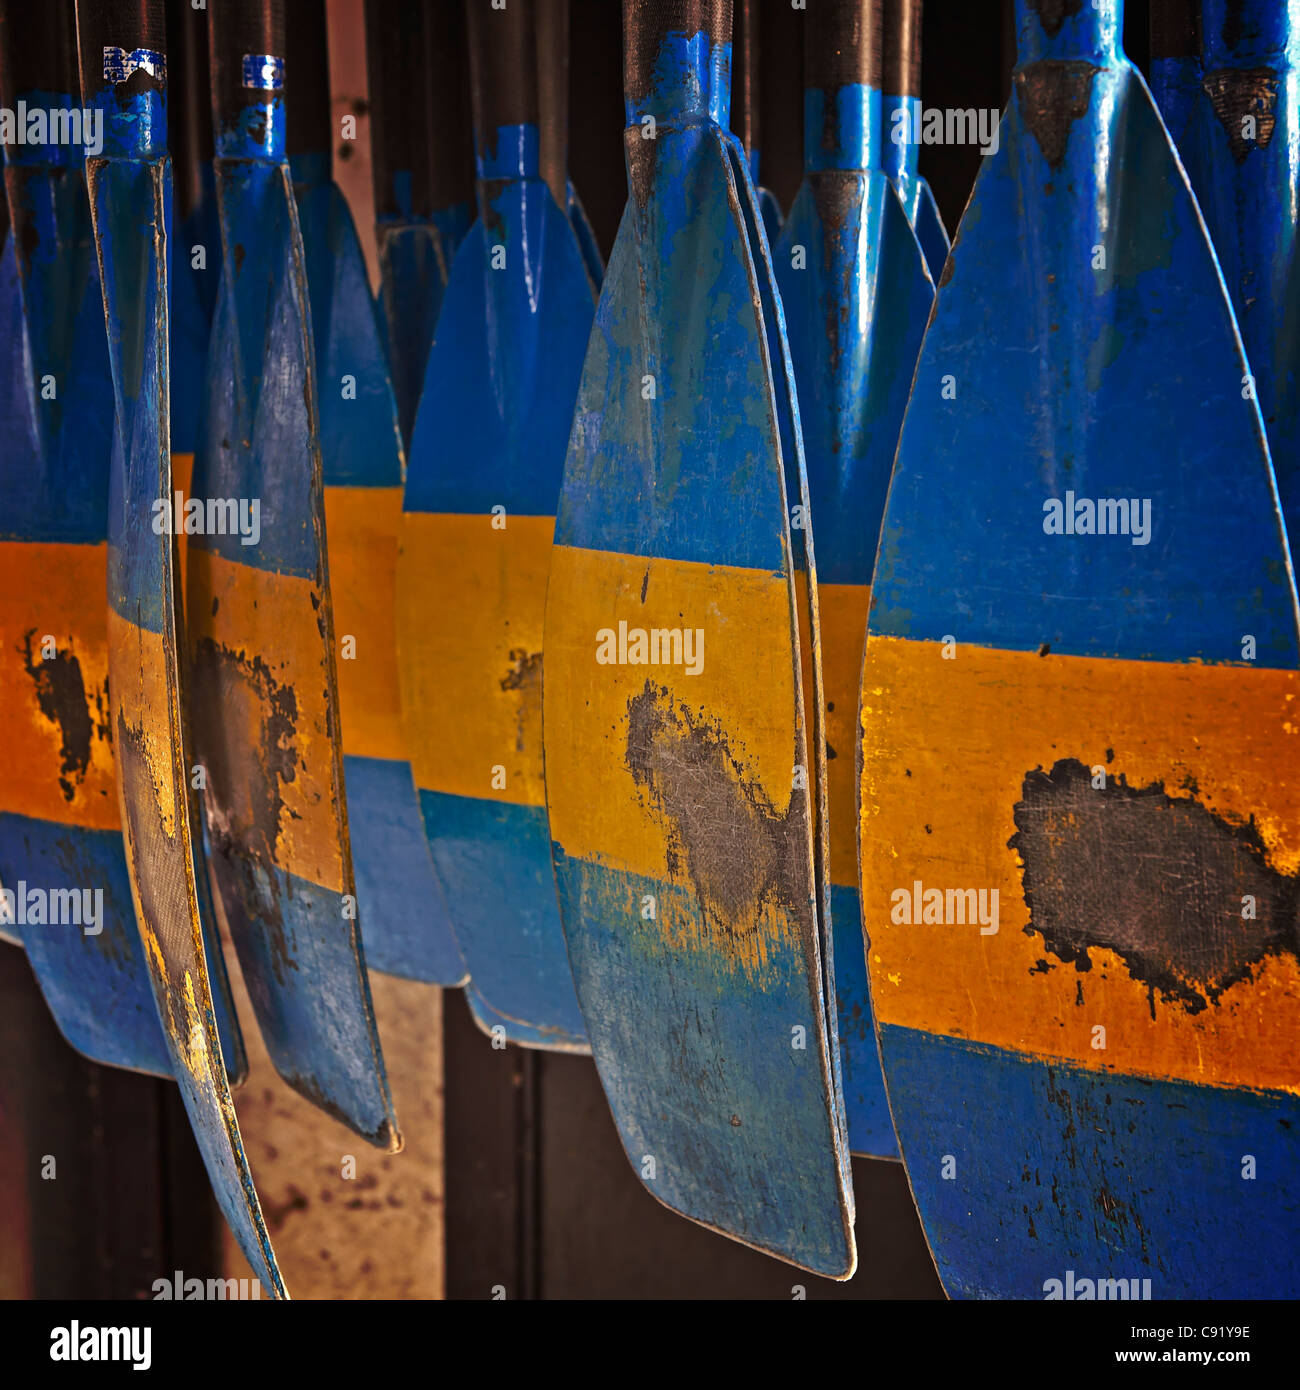 several rudder hung on the wall, painted in color Stock Photo